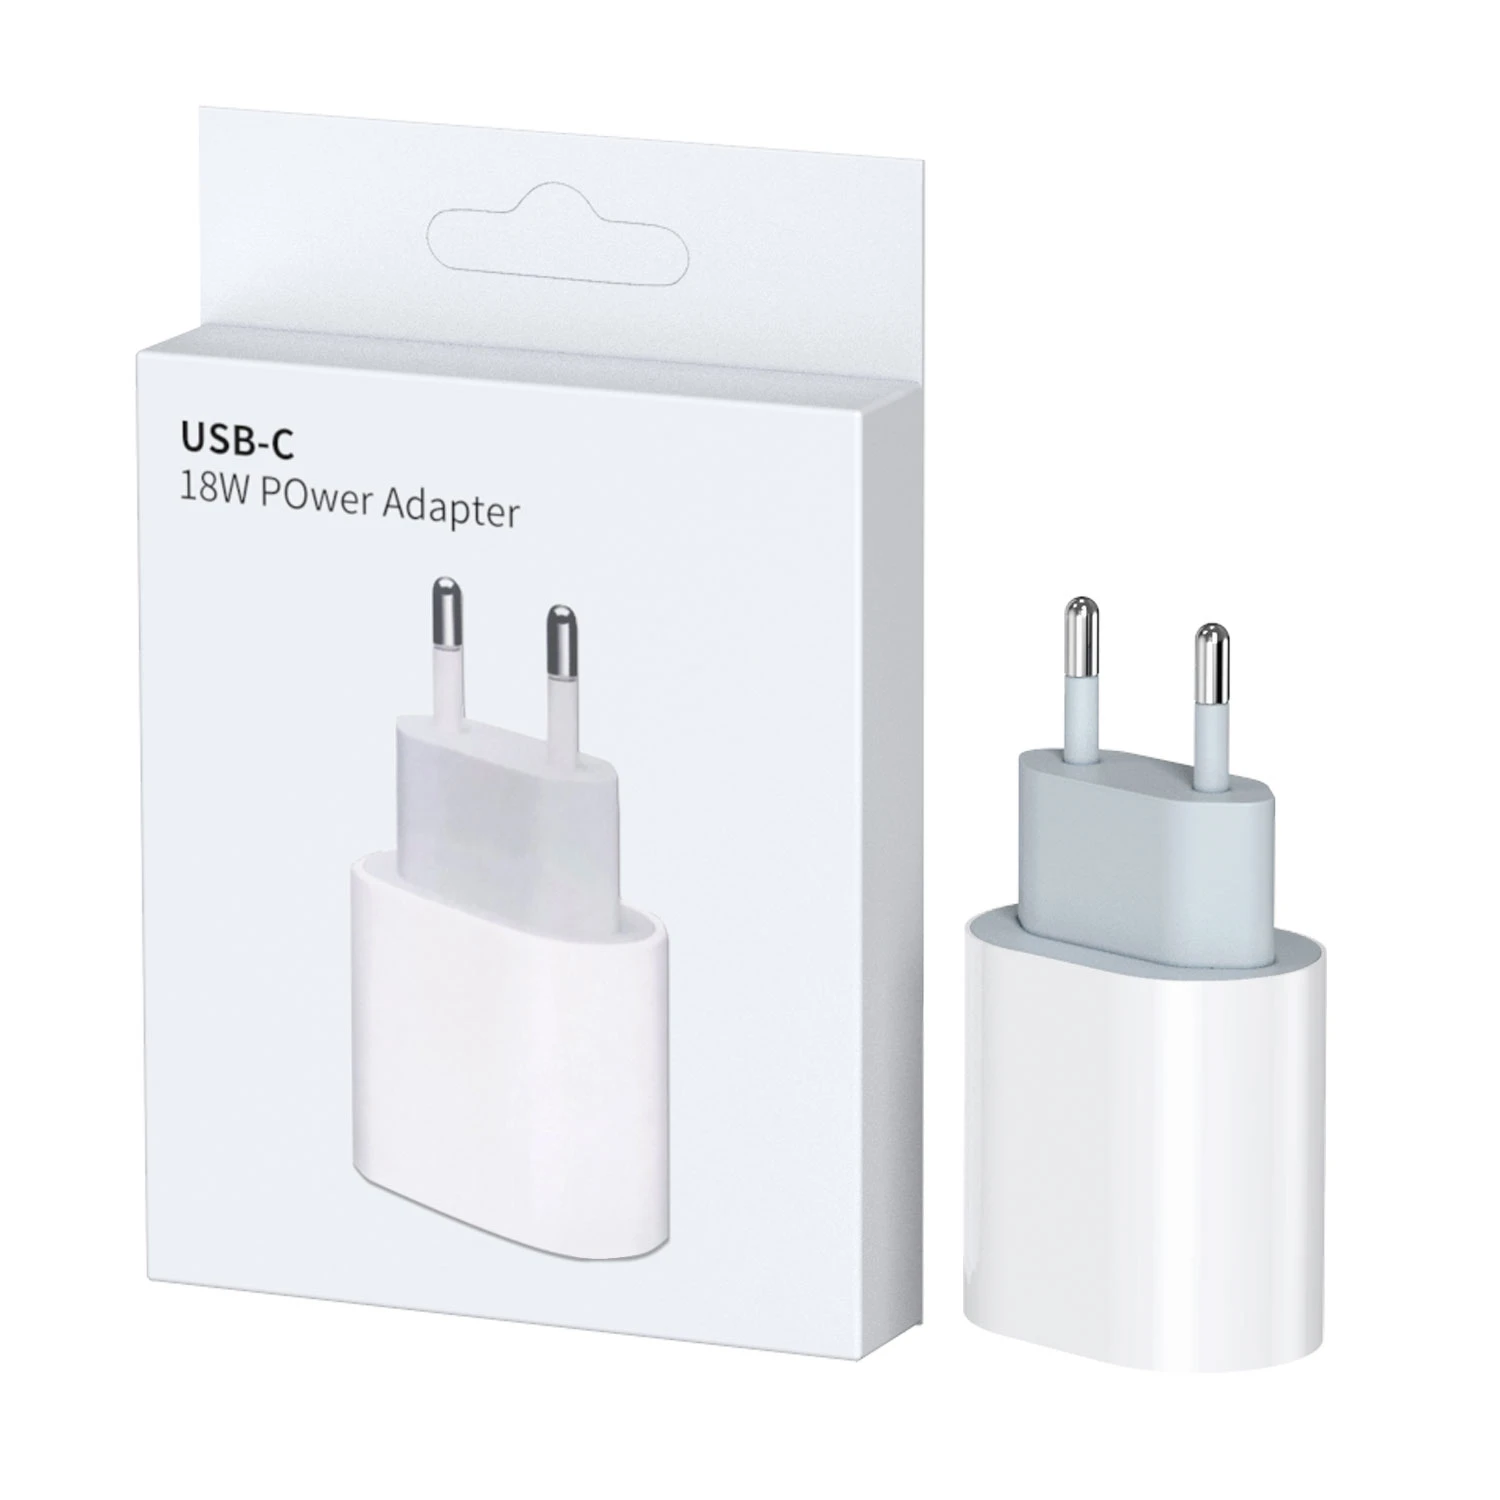 Original OEM usb-c wall charger 18w power adapter type c for iphone 12 charger fast charging accessories